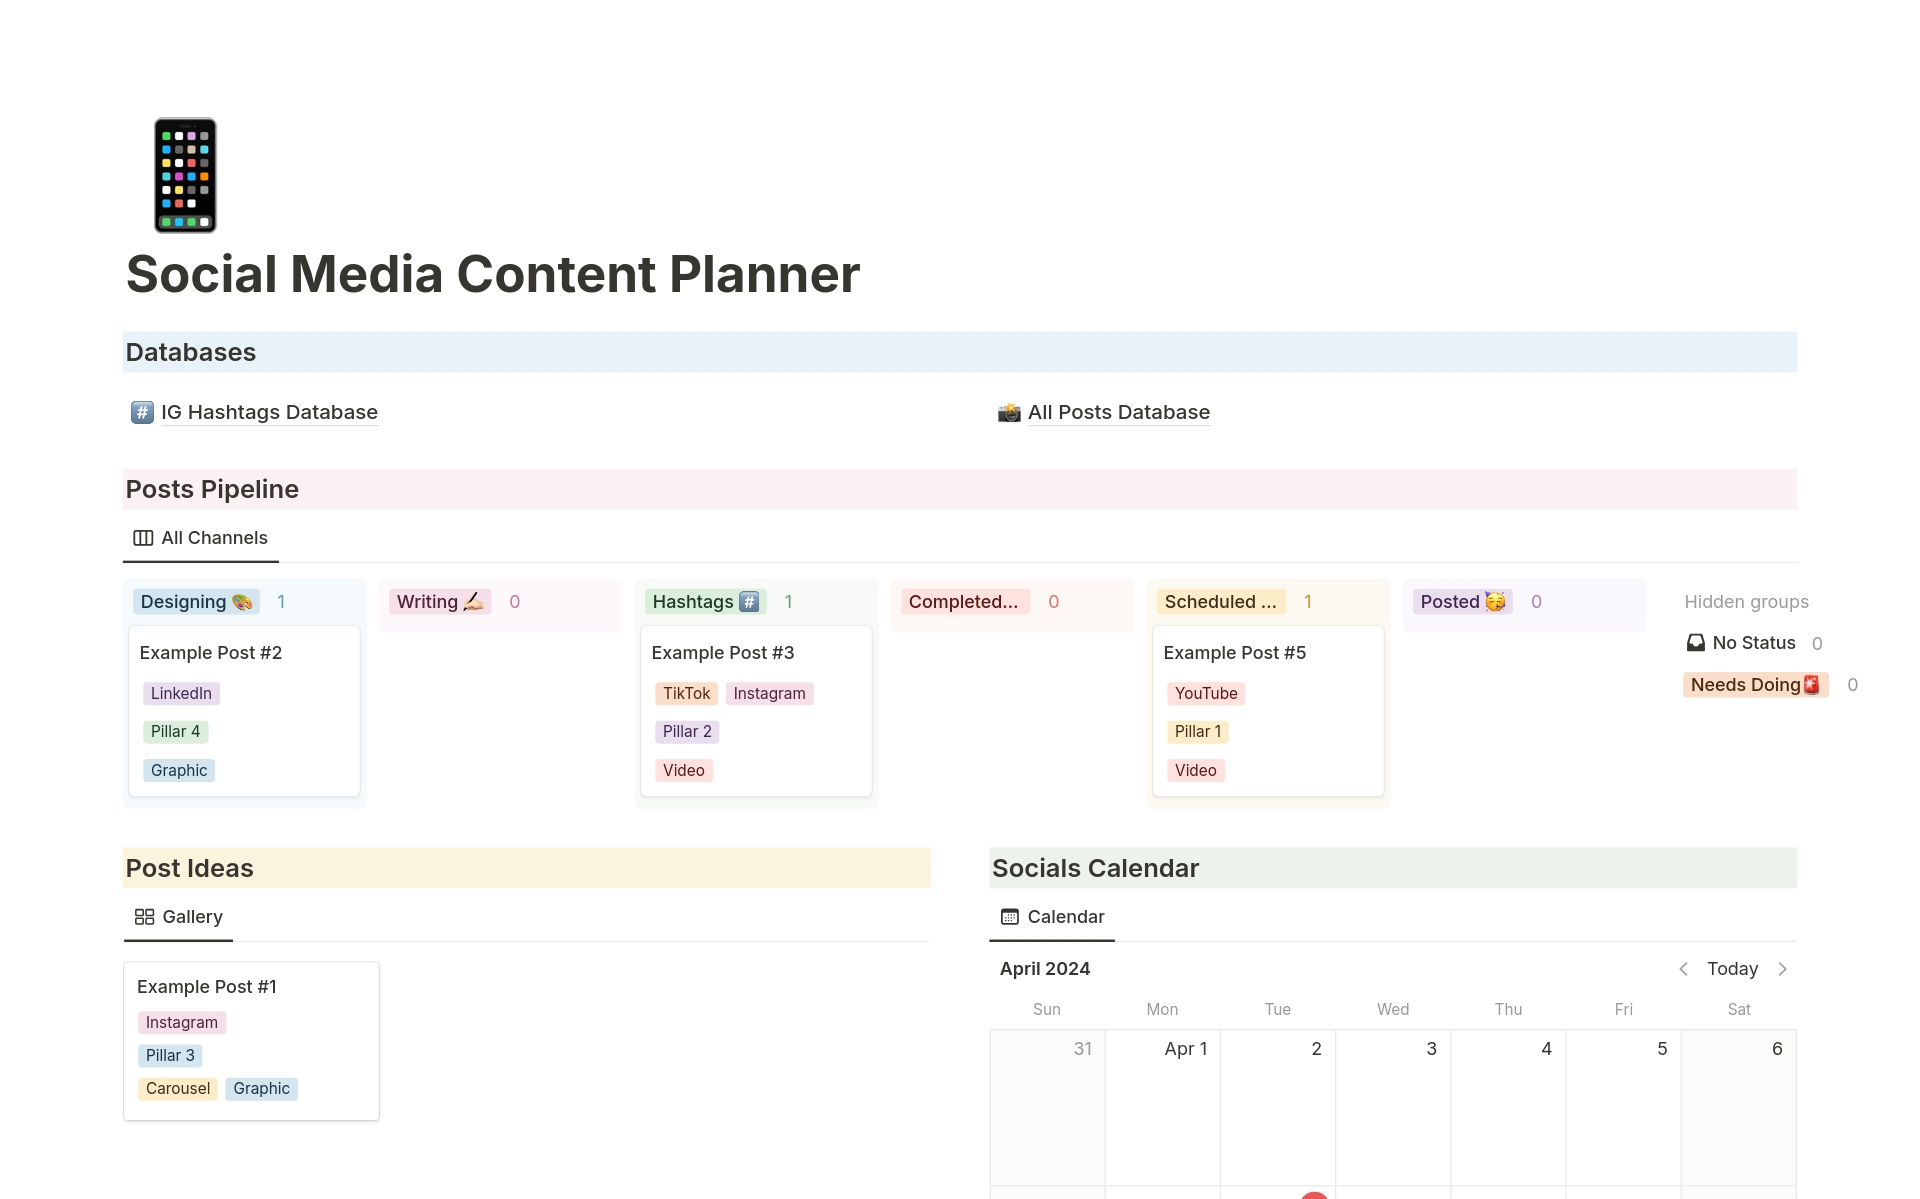 This Notion template is simple and easy to use system for tracking social media posts through the content creation pipeline.